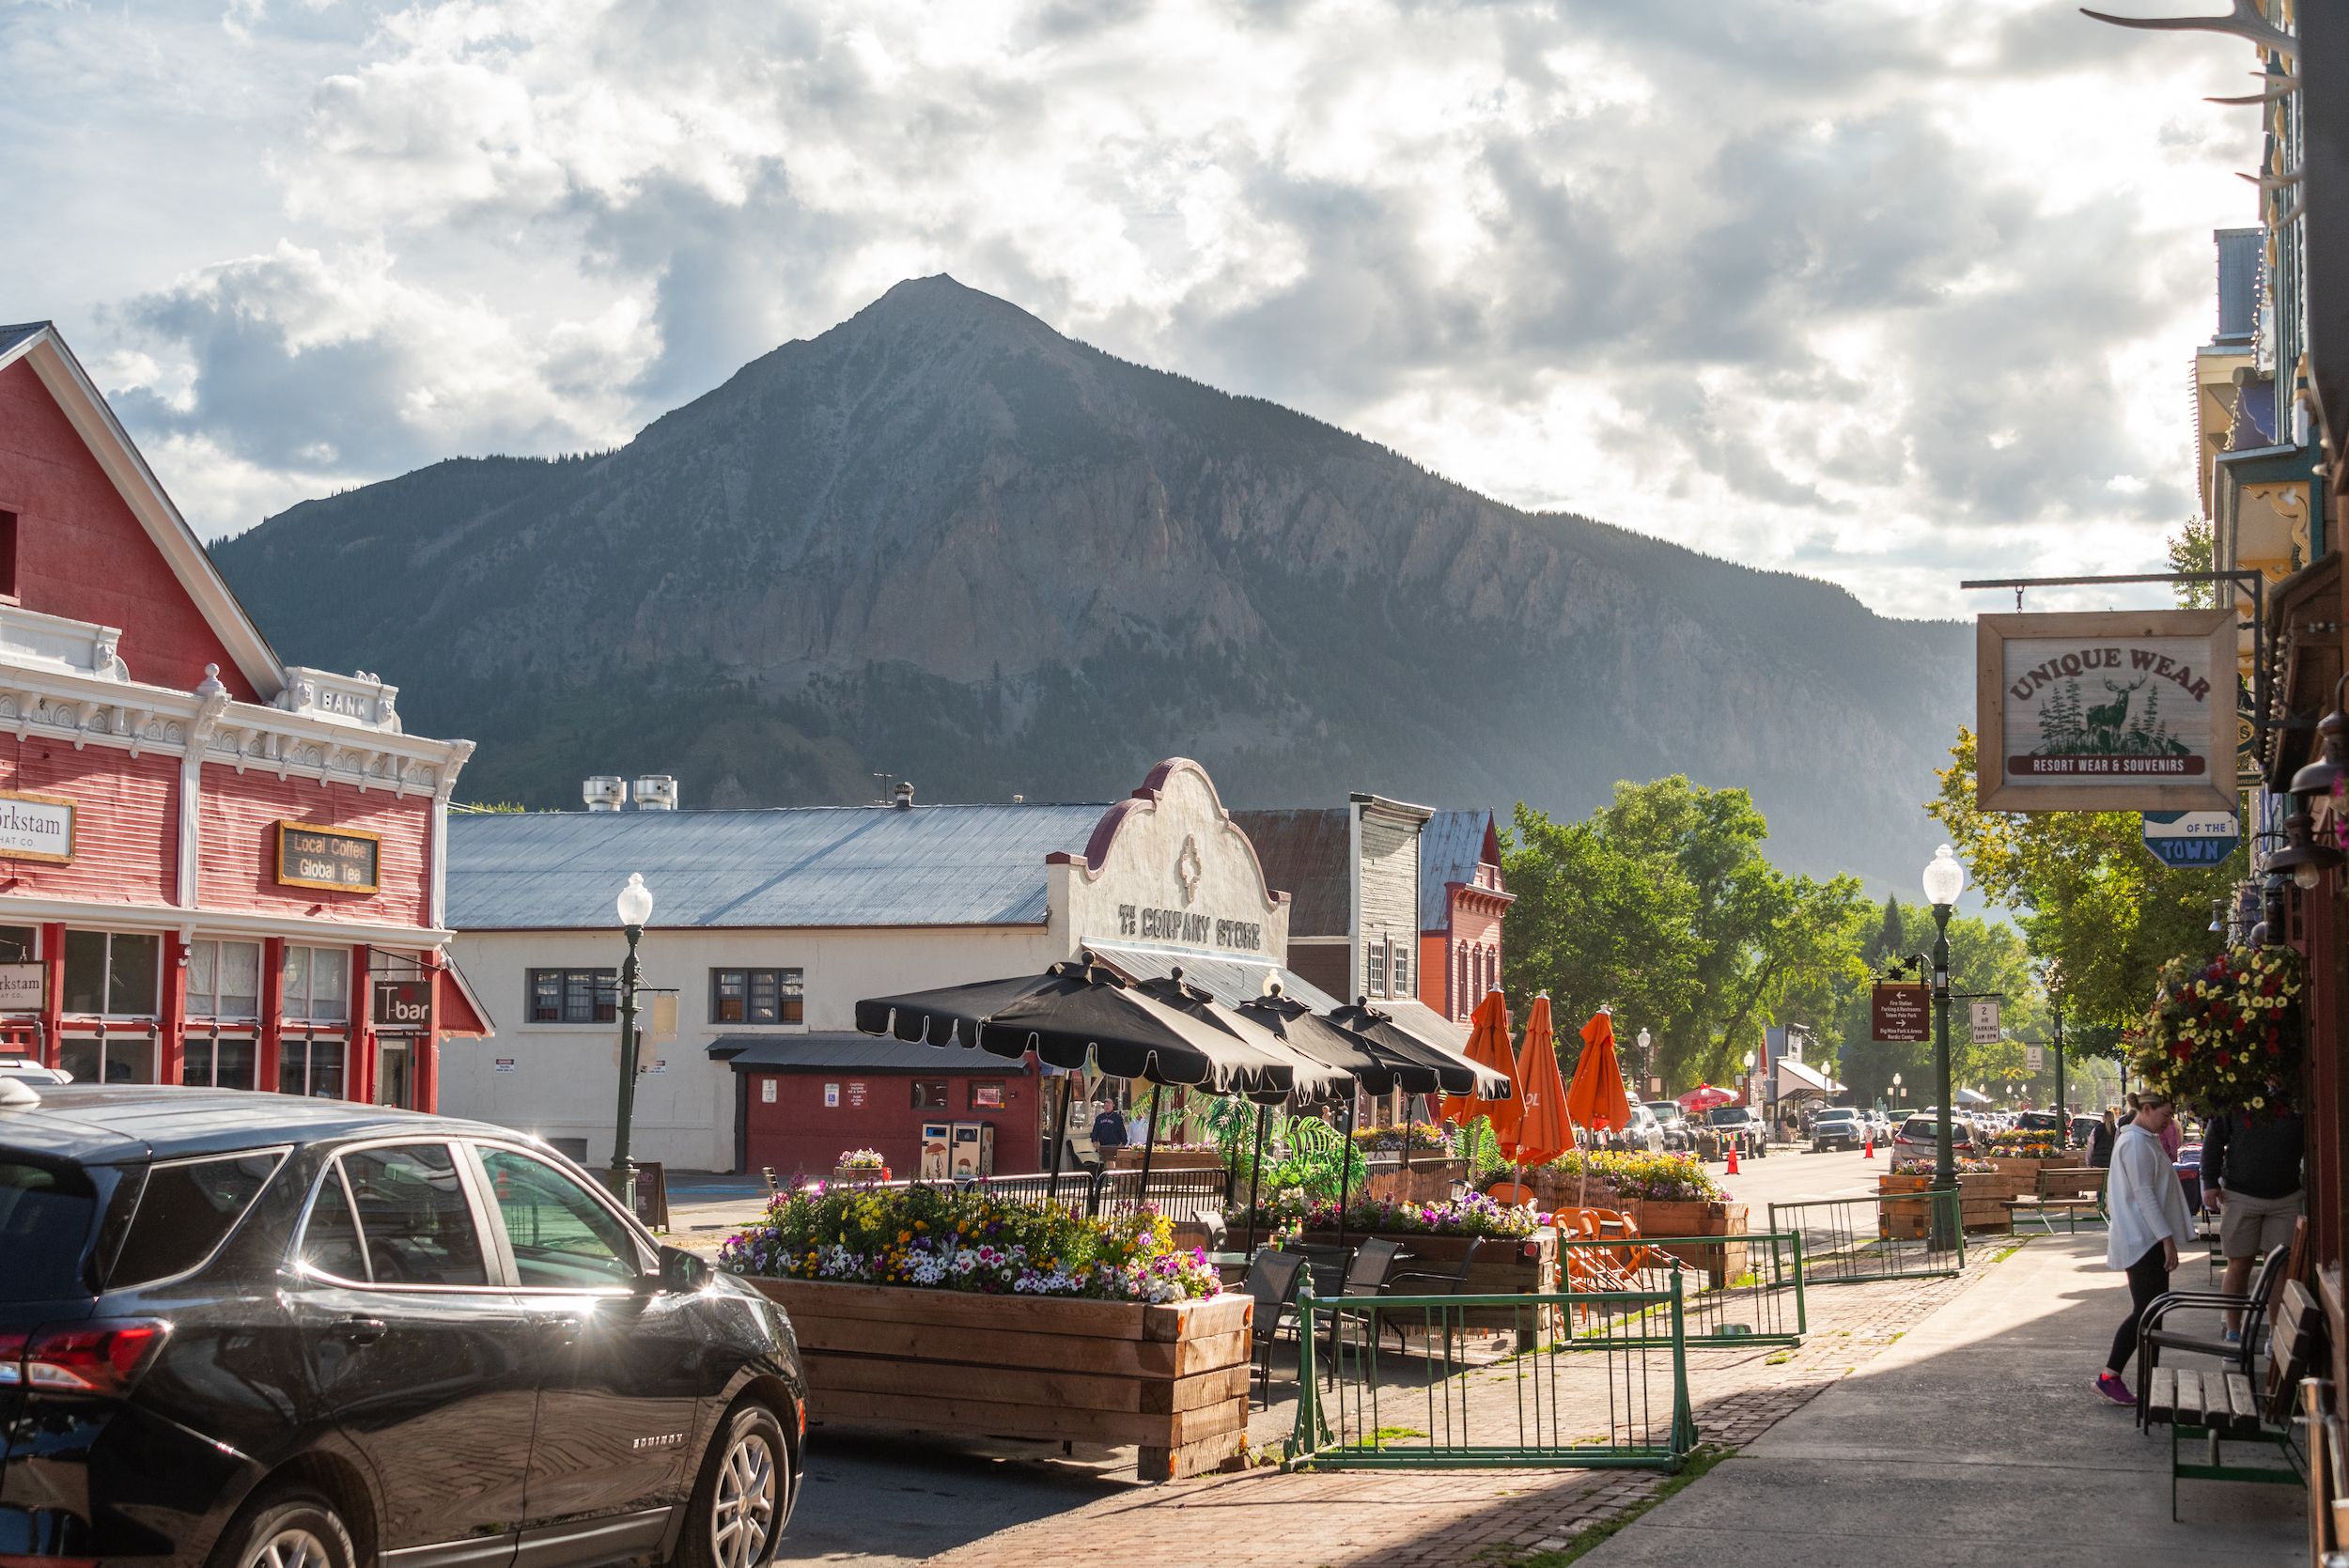 The view of a mountain peak hovering over a downtown street. This is Elk Ave in Crested Butte during summer